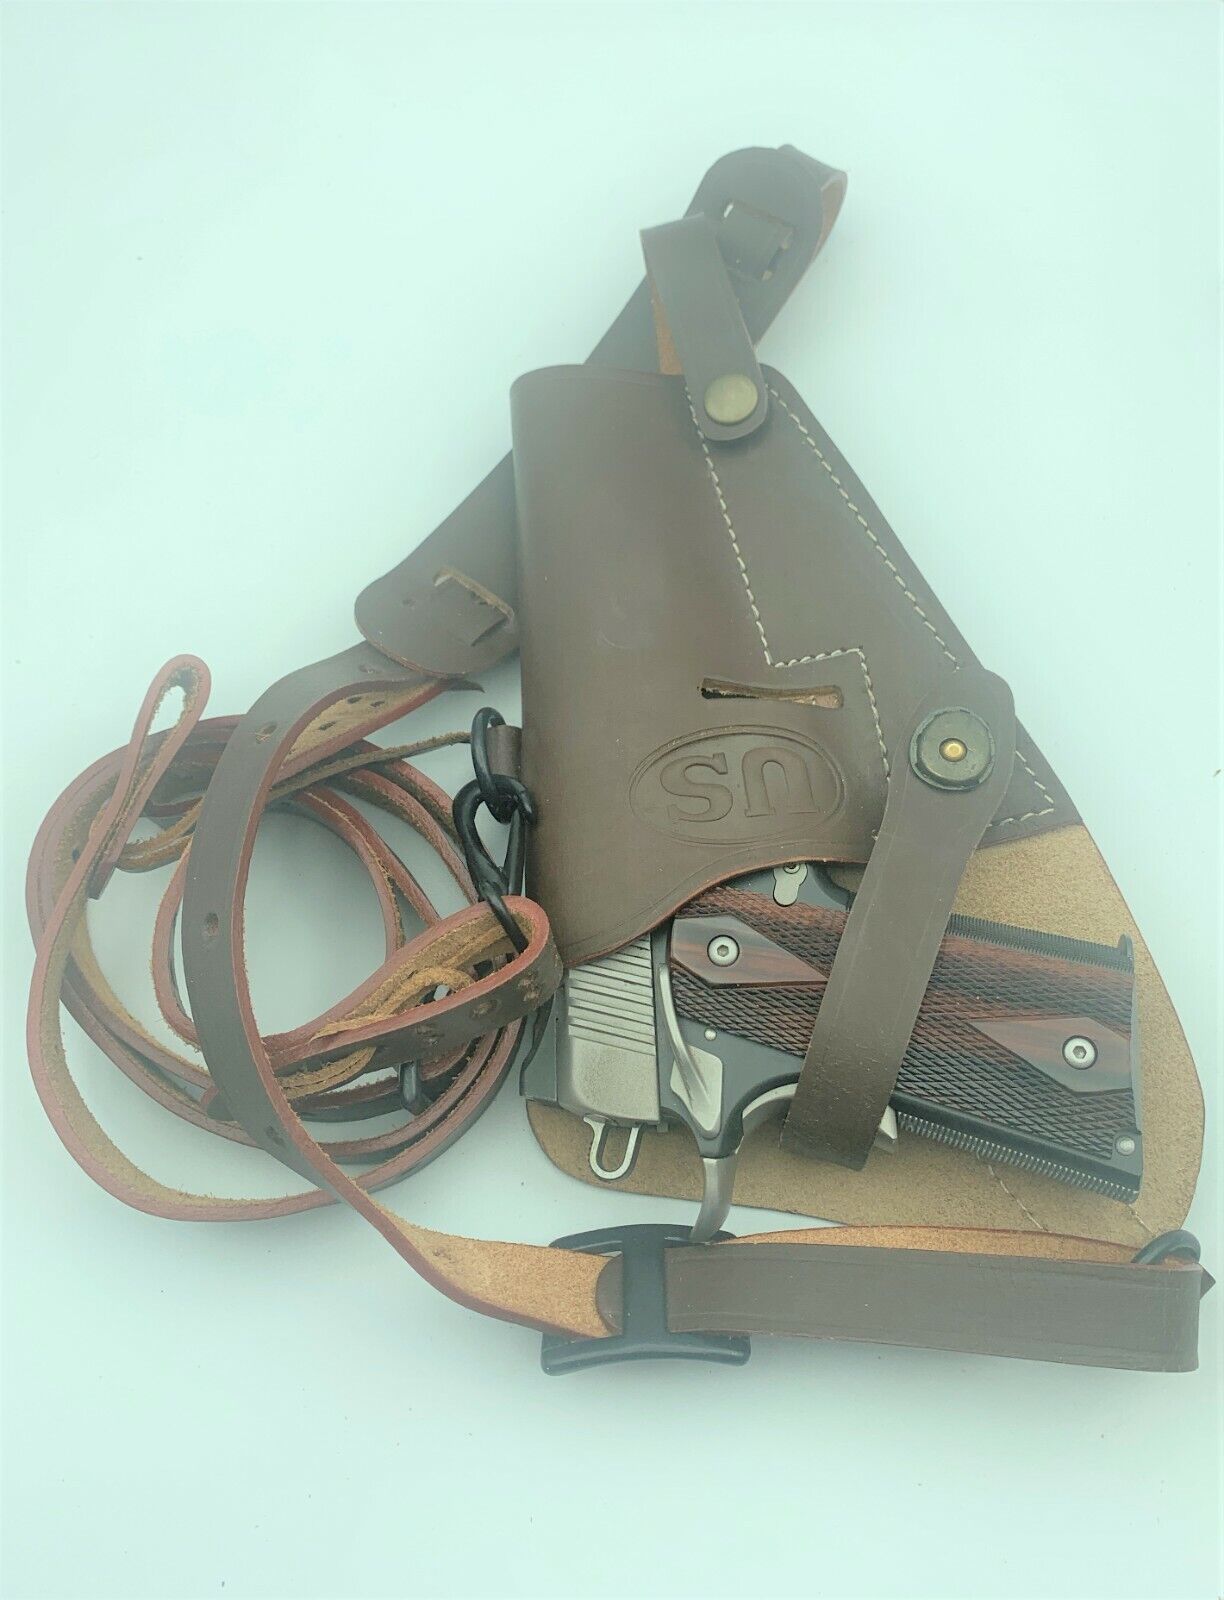 US ARMY 1911 .45 PISTOL MODEL M7 LEATHER SHOULDER HOLSTER BROWN WWII ALSO M9